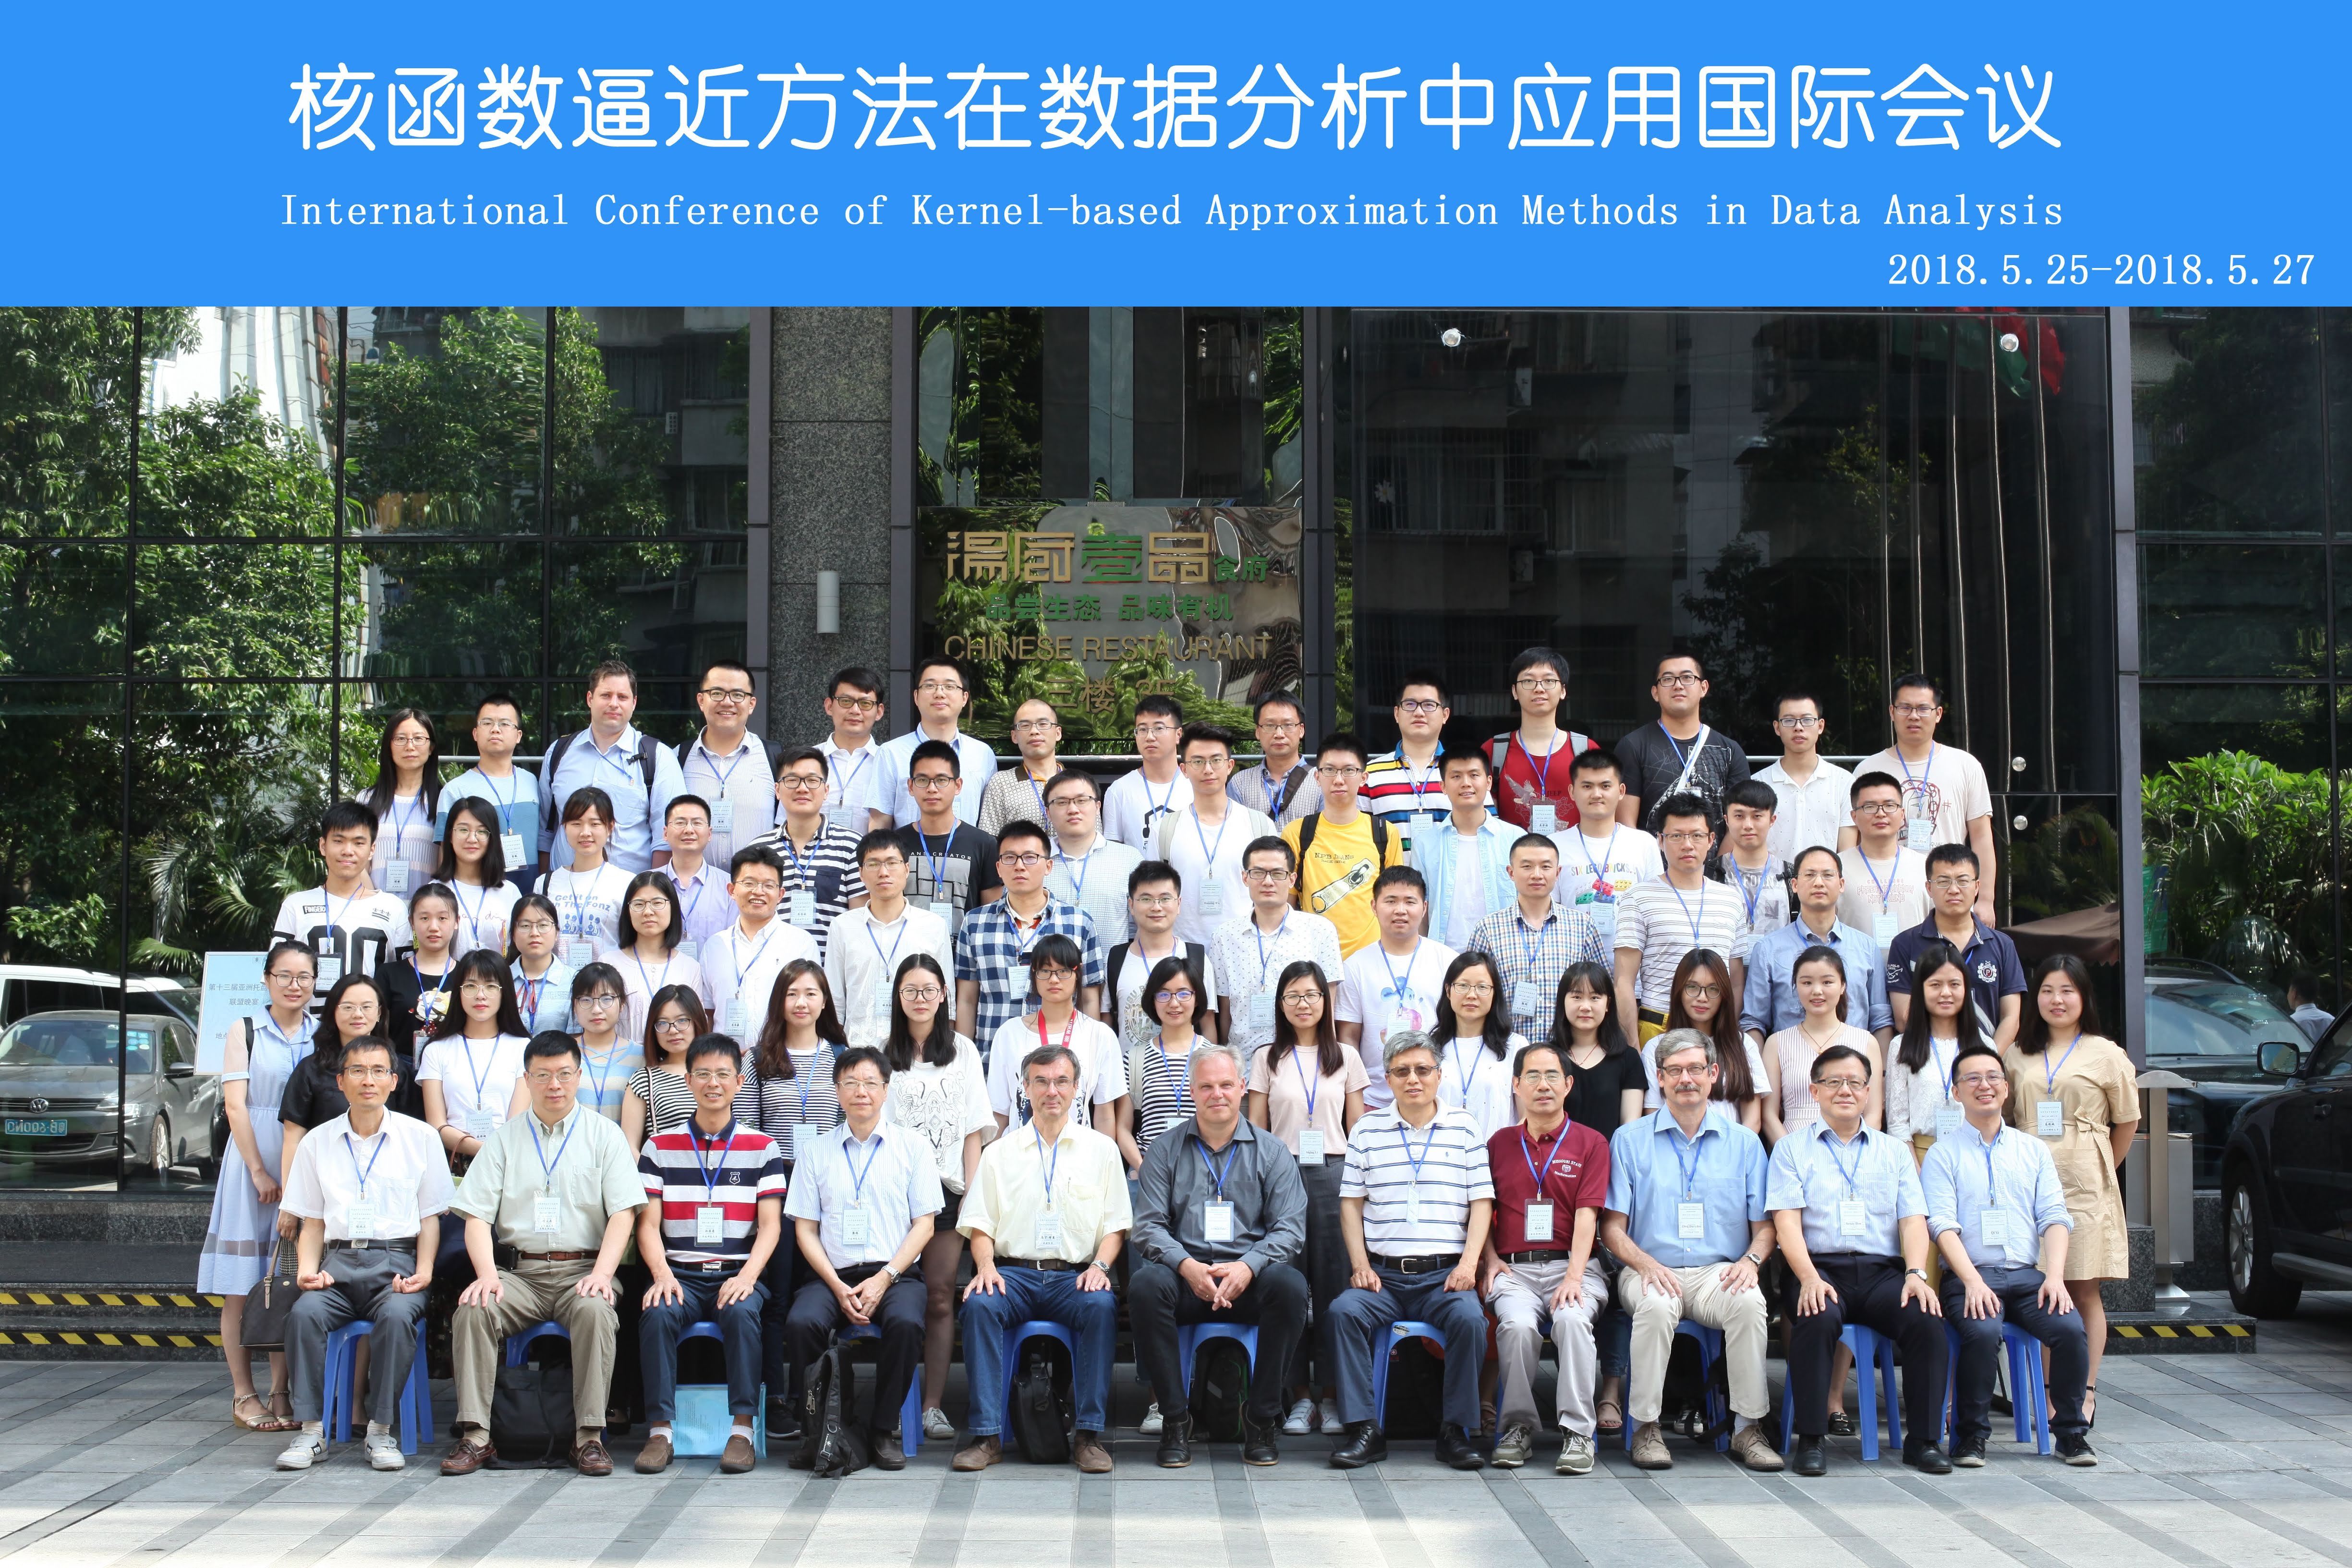 International Conference of Kernel-based Approximation Methods in Data Analysis